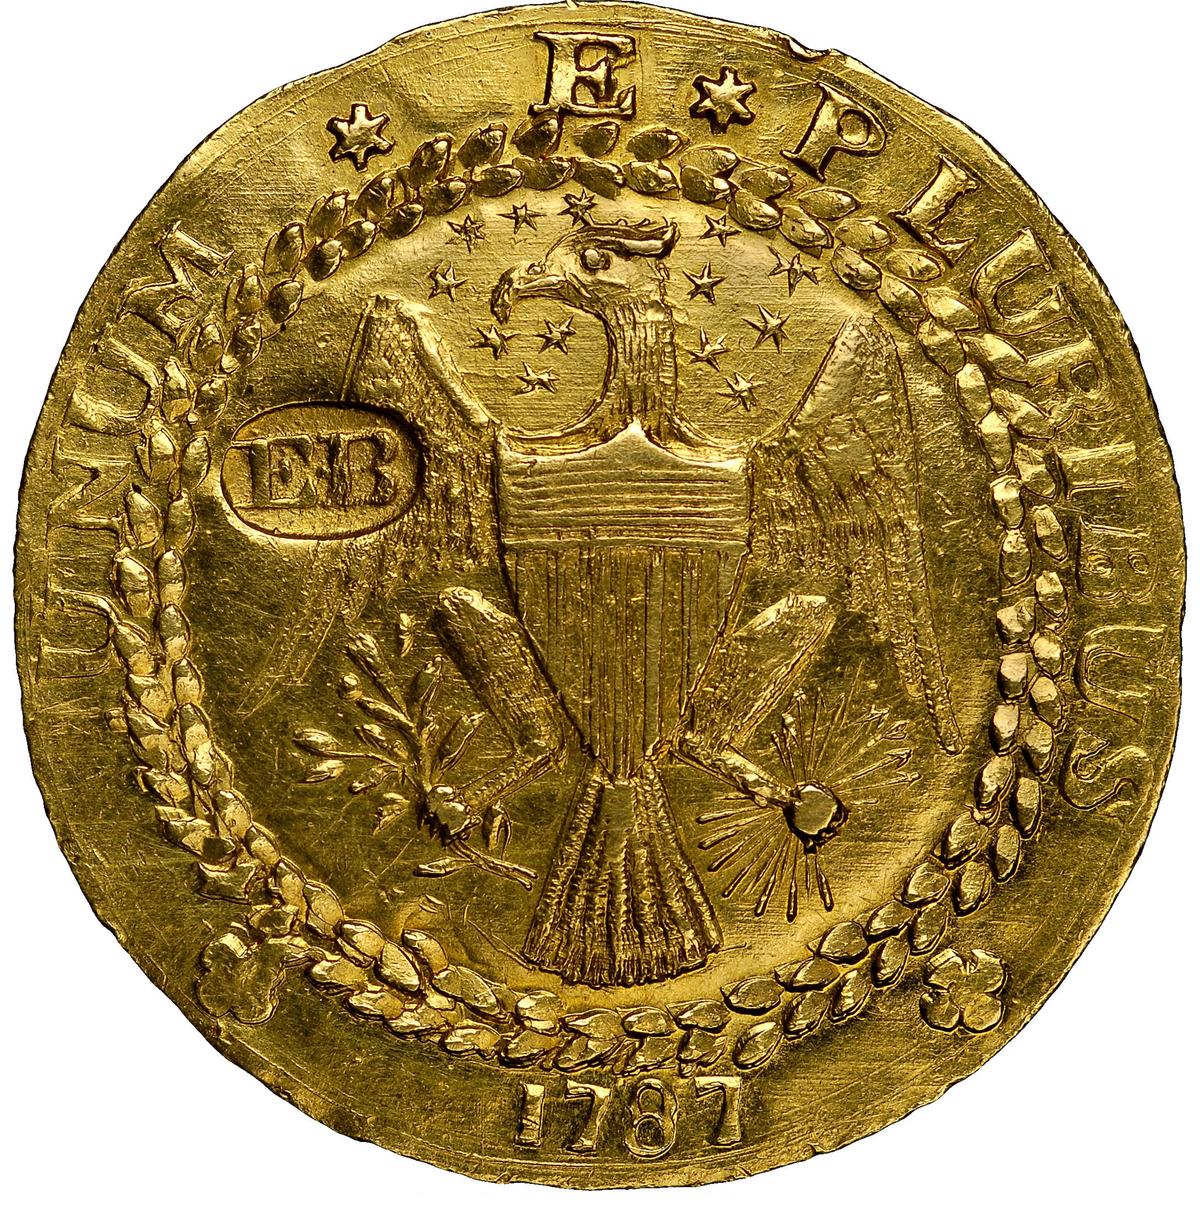 One of seven made, a 1787 New York-style Brasher doubloon sold for $9.3 million in 2021 is a great example of how rarity can drive coin values. (Courtesy of Heritage Auctions)